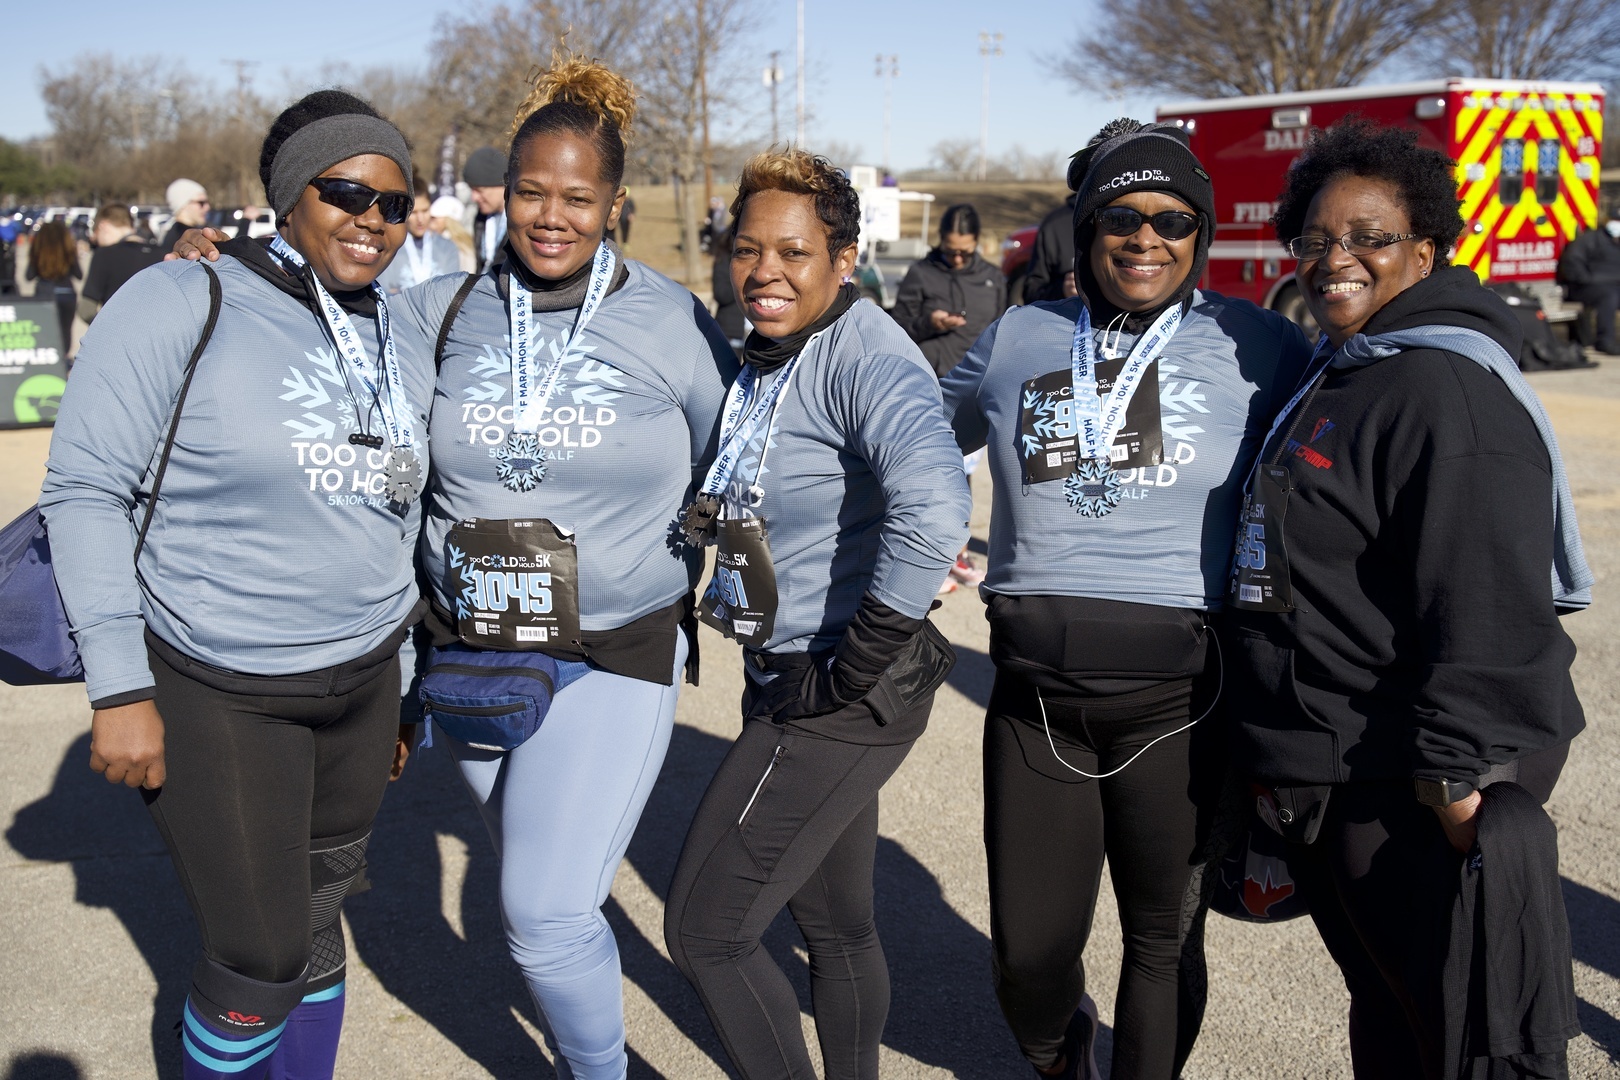 Too Cold to Hold Half Marathon, 10K, and 5K, Dallas, Texas, United States